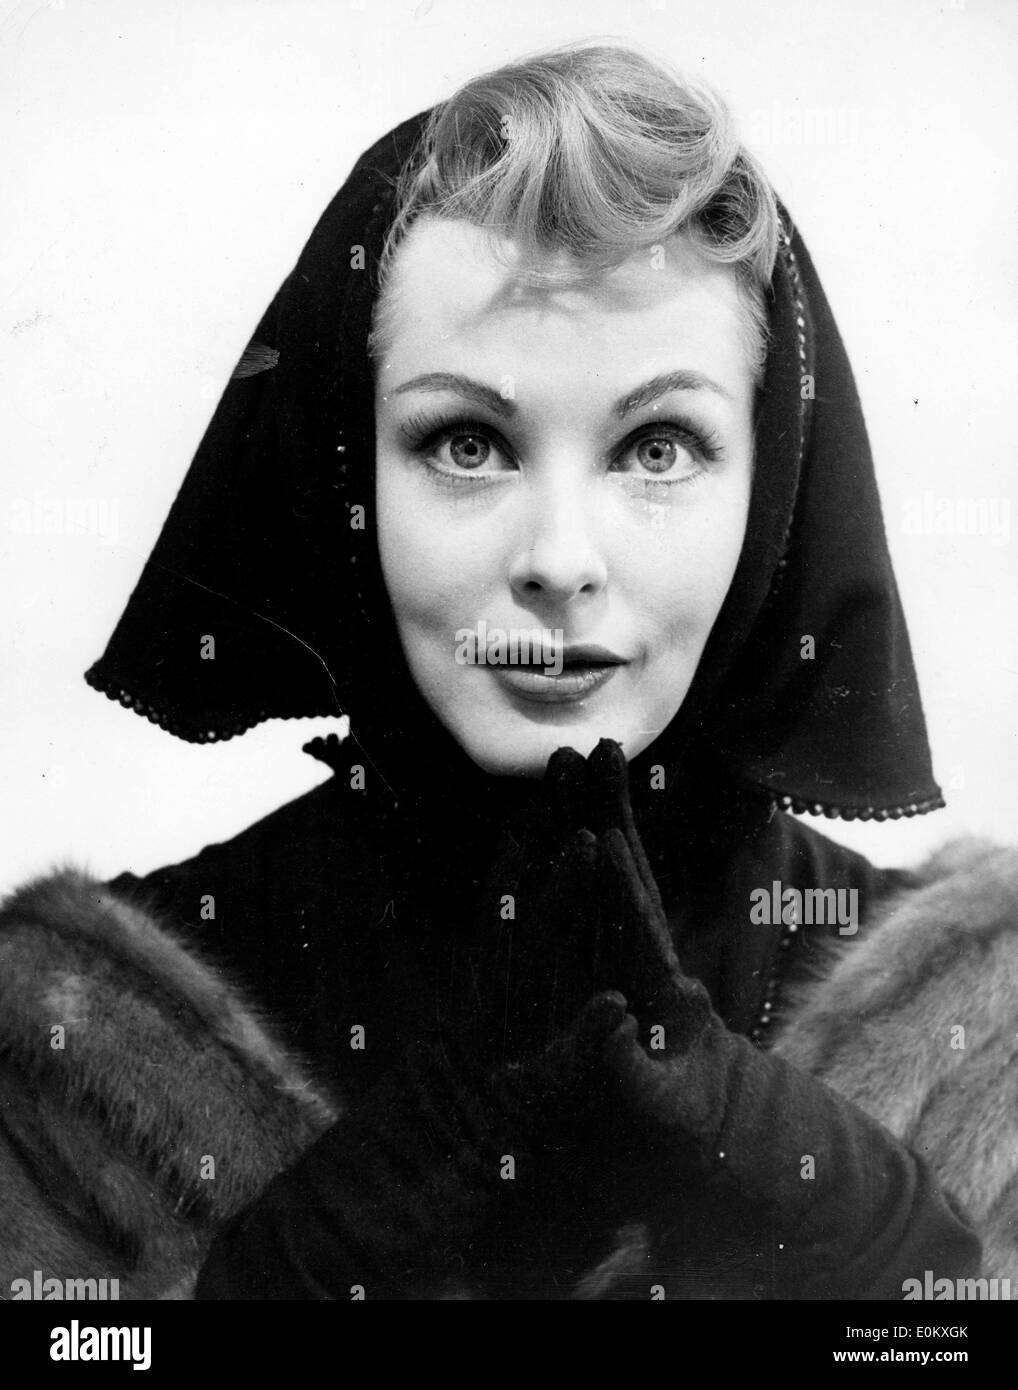 Jan. 01, 1951 - File Photo: circa 1950s, exact location unknown. ARLENE DAHL (born August 11, 1925) is an American movie actress and former MGM contract star, who achieved notability during the 1950s. She is the mother of actor Lorenzo Lamas. Stock Photo